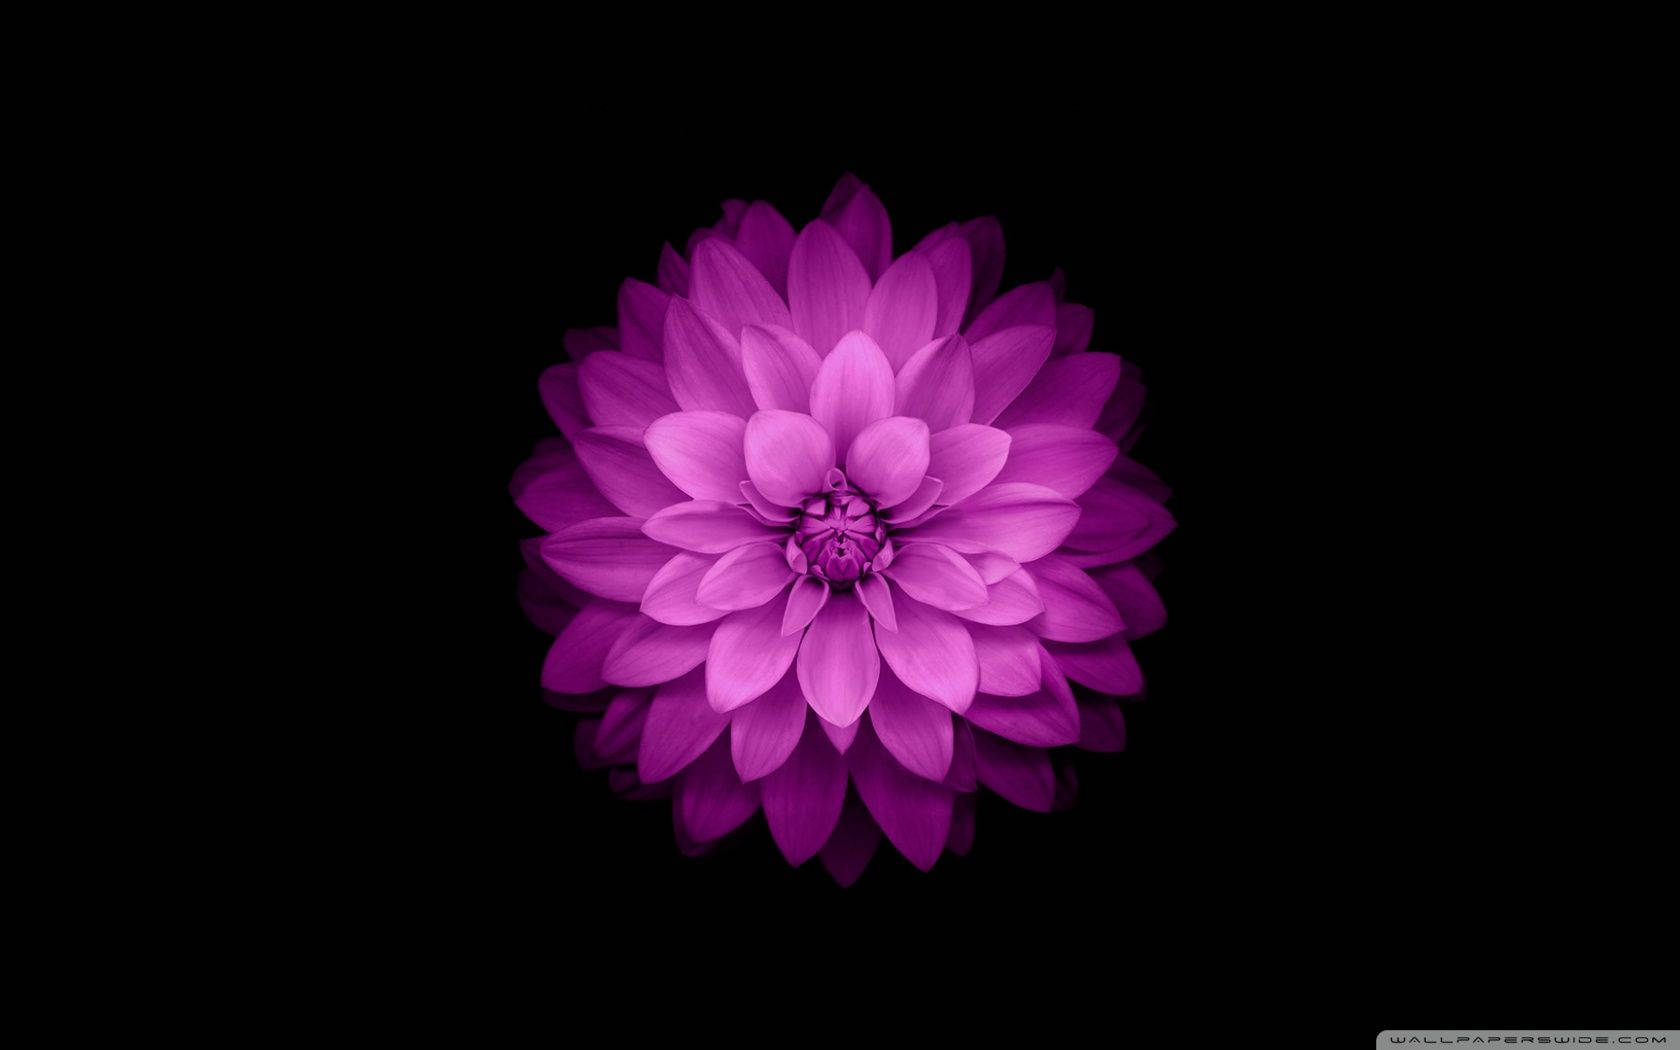 Intensely Colored Purple Flower Against The Unique Design Of Apple Wallpaper